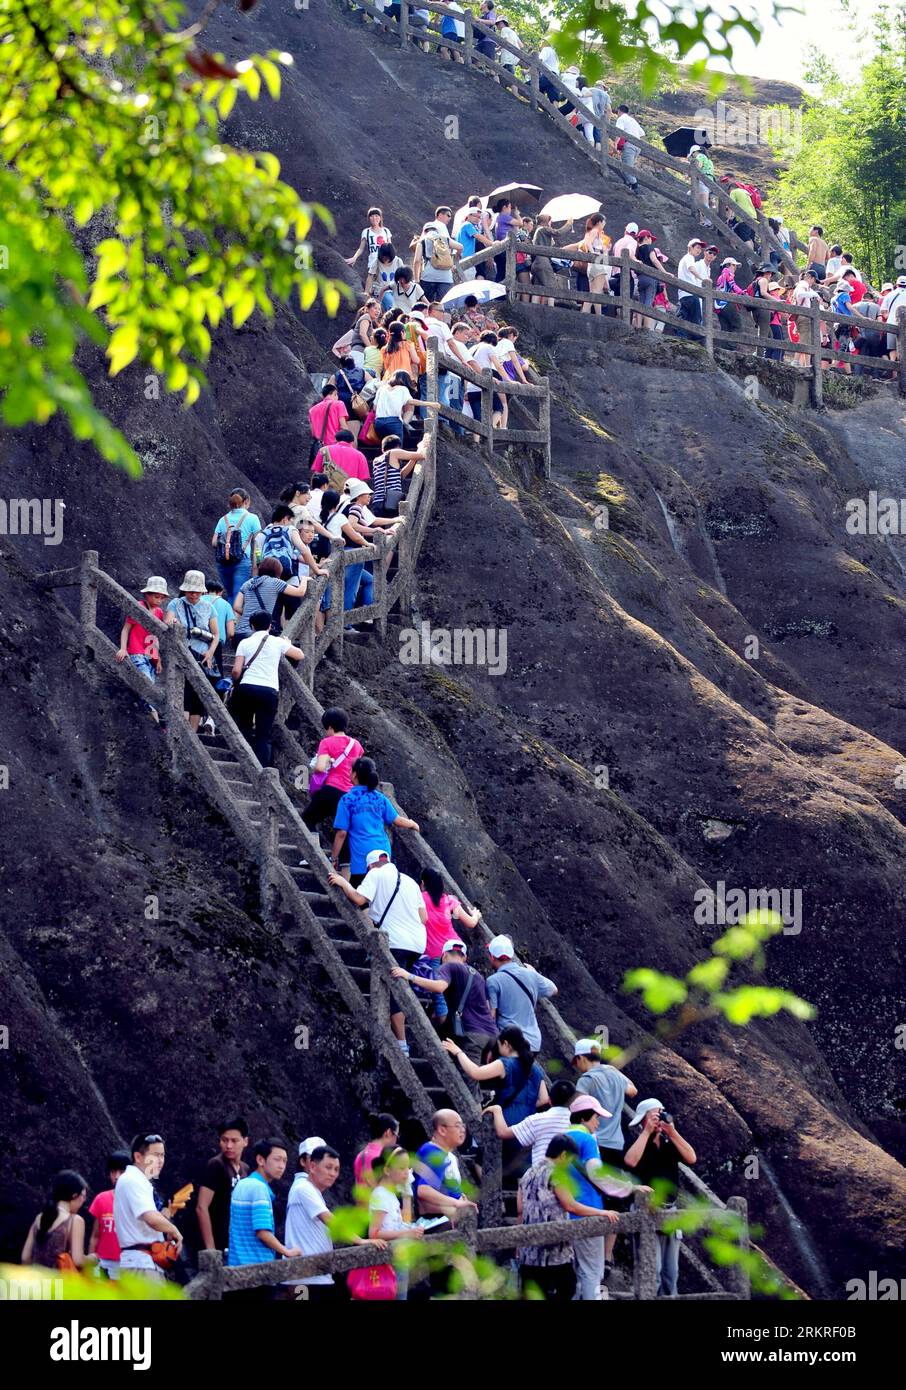 Bildnummer: 58224451  Datum: 11.07.2012  Copyright: imago/Xinhua (120711) -- WUYISHAN, July 11, 2012 (Xinhua) -- Tourists visit Tianyou Peak of Wuyi Mountain in southeast China s Fujian Province, July 11, 2012. Wuyi Mountain, located at northwestern Fujian, attracted 4.27 million visitors during the first half of 2012, with a year-on-year growth rate of 17.9 percent. Meanwhile, tourism revenue of Wuyi Mountain this year increased about 20 percent to 7 billion RMB from that of the same period last year. (Xinhua/Zhang Guojun) (gjh) CHINA-FUJIAN-WUYISHAN-TOURISM (CN) PUBLICATIONxNOTxINxCHN Reisen Stock Photo